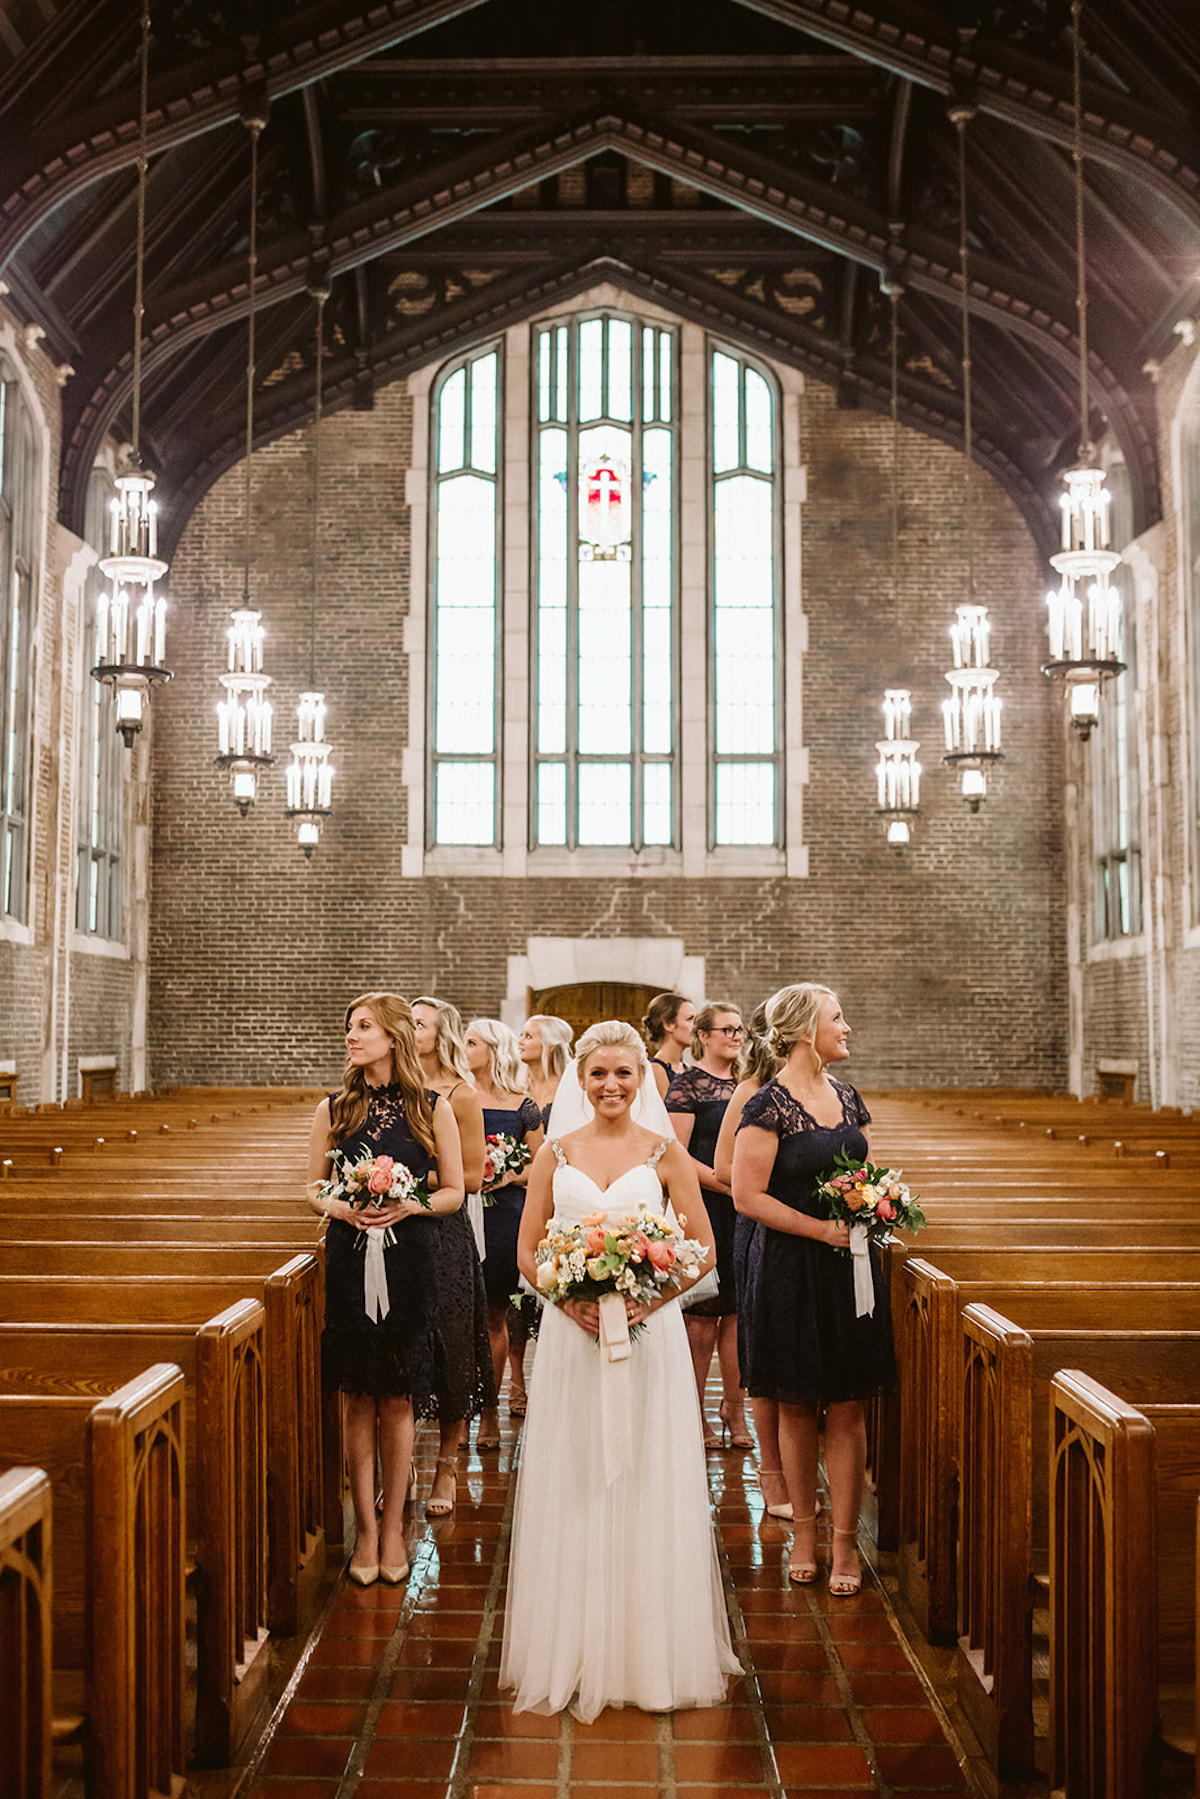 Bride and bridesmaids stand between wooden pews, a large window behind them. She holds a pink, peach, and yellow bouquet.